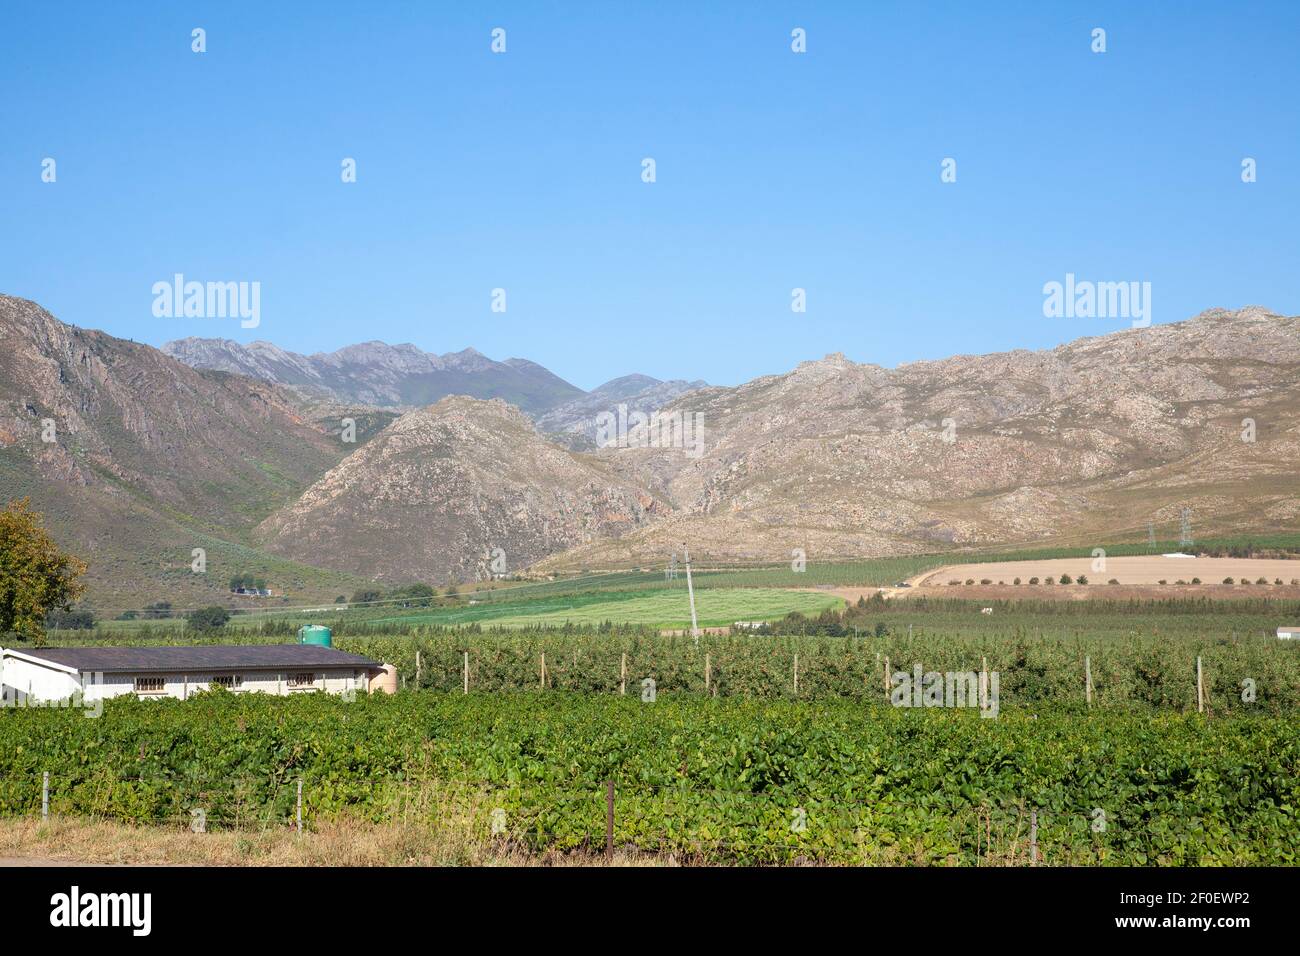 Agricultural landscape with fruit orchards at the foot of  Riviersonderend Mountains near Villiersdorp, Western Cape, South Africa at sunset Stock Photo